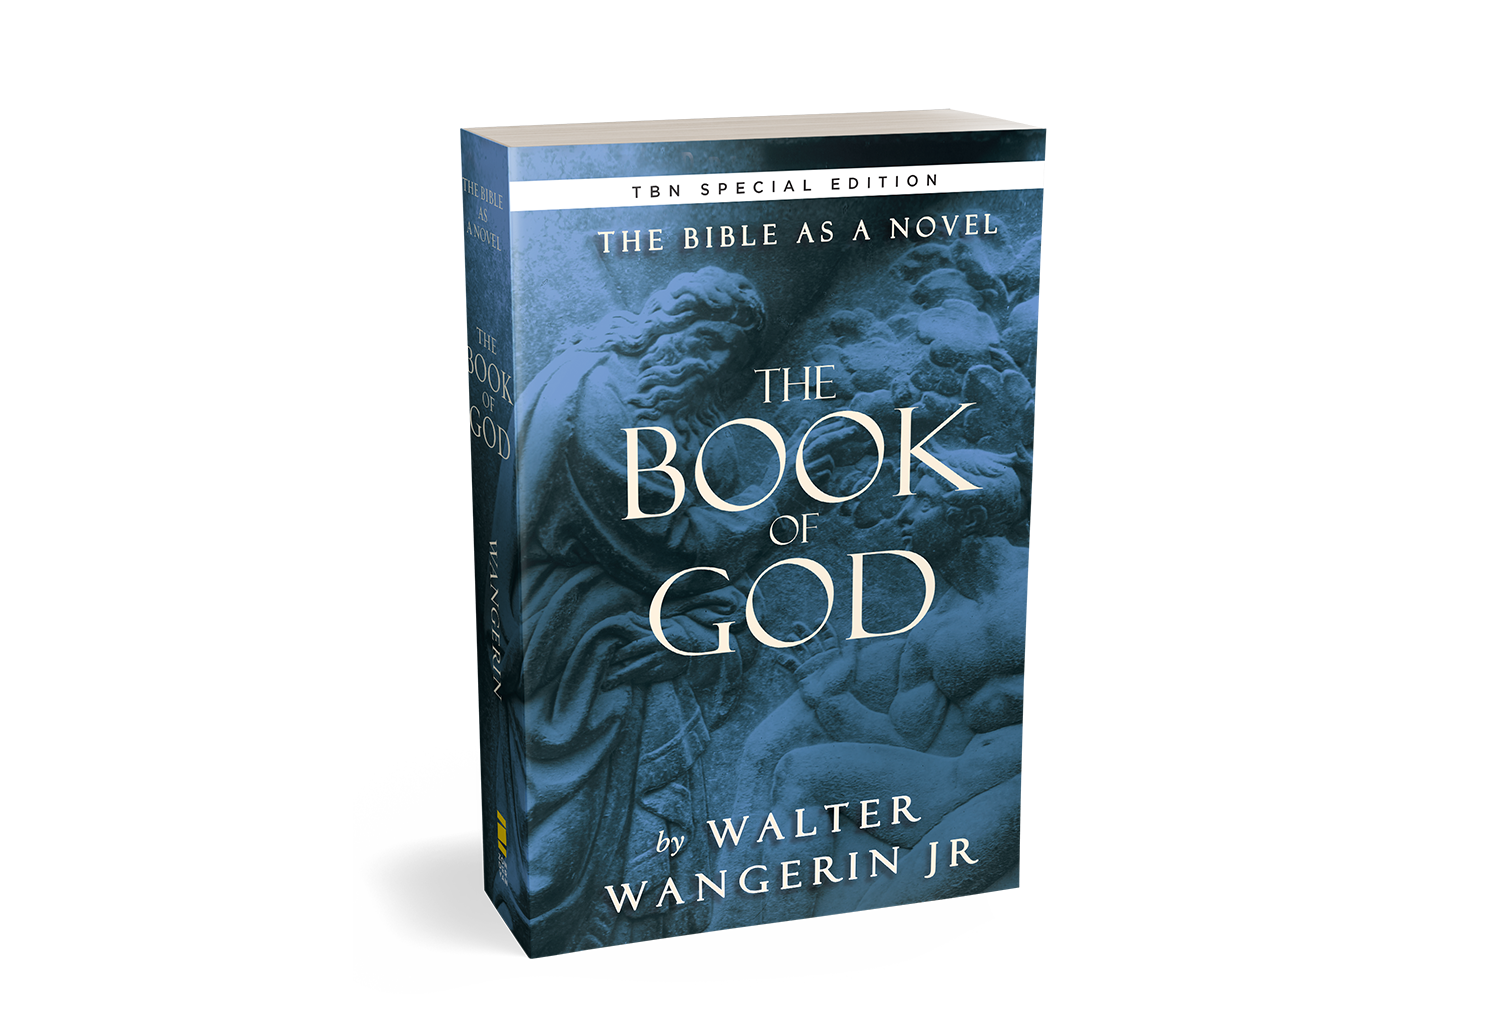 Receive The Book of God, by Walter Wangerin Jr. on TBN